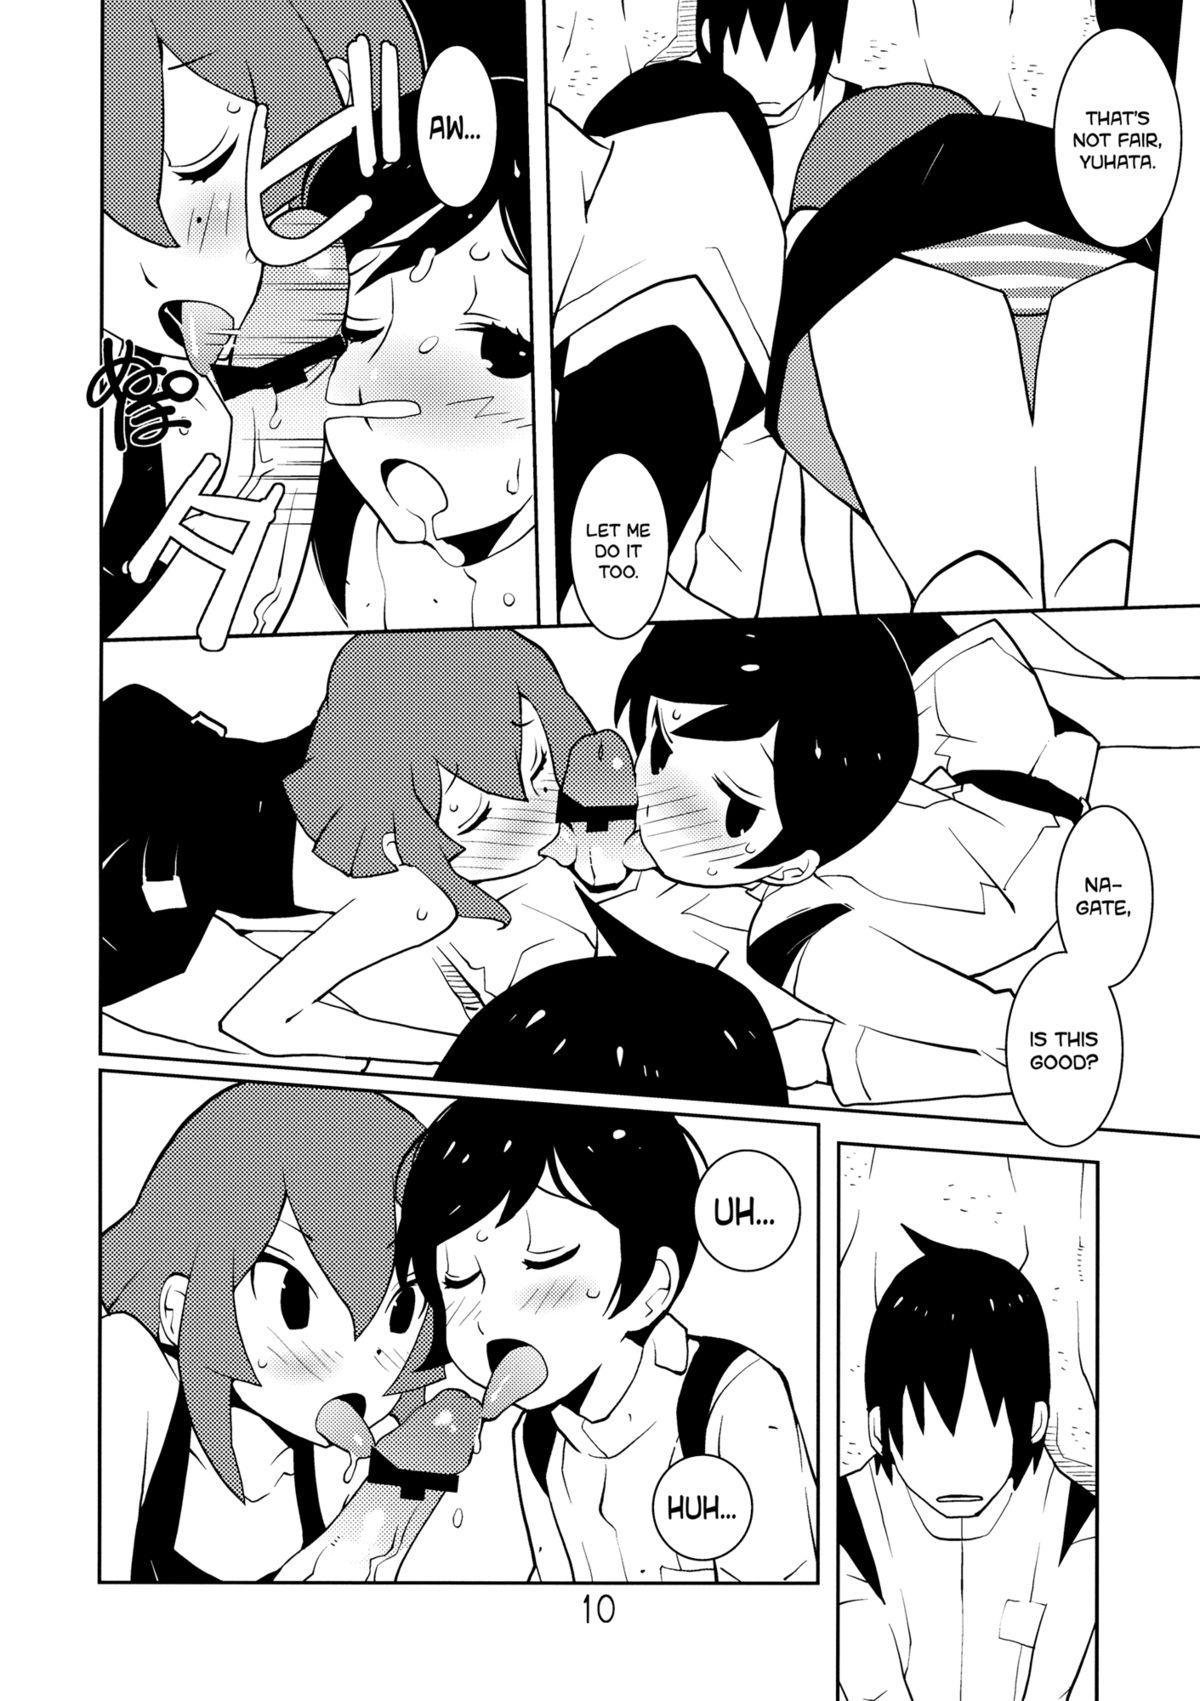 Nut Valkyrie of Sidonia - Knights of sidonia Black Gay - Page 9